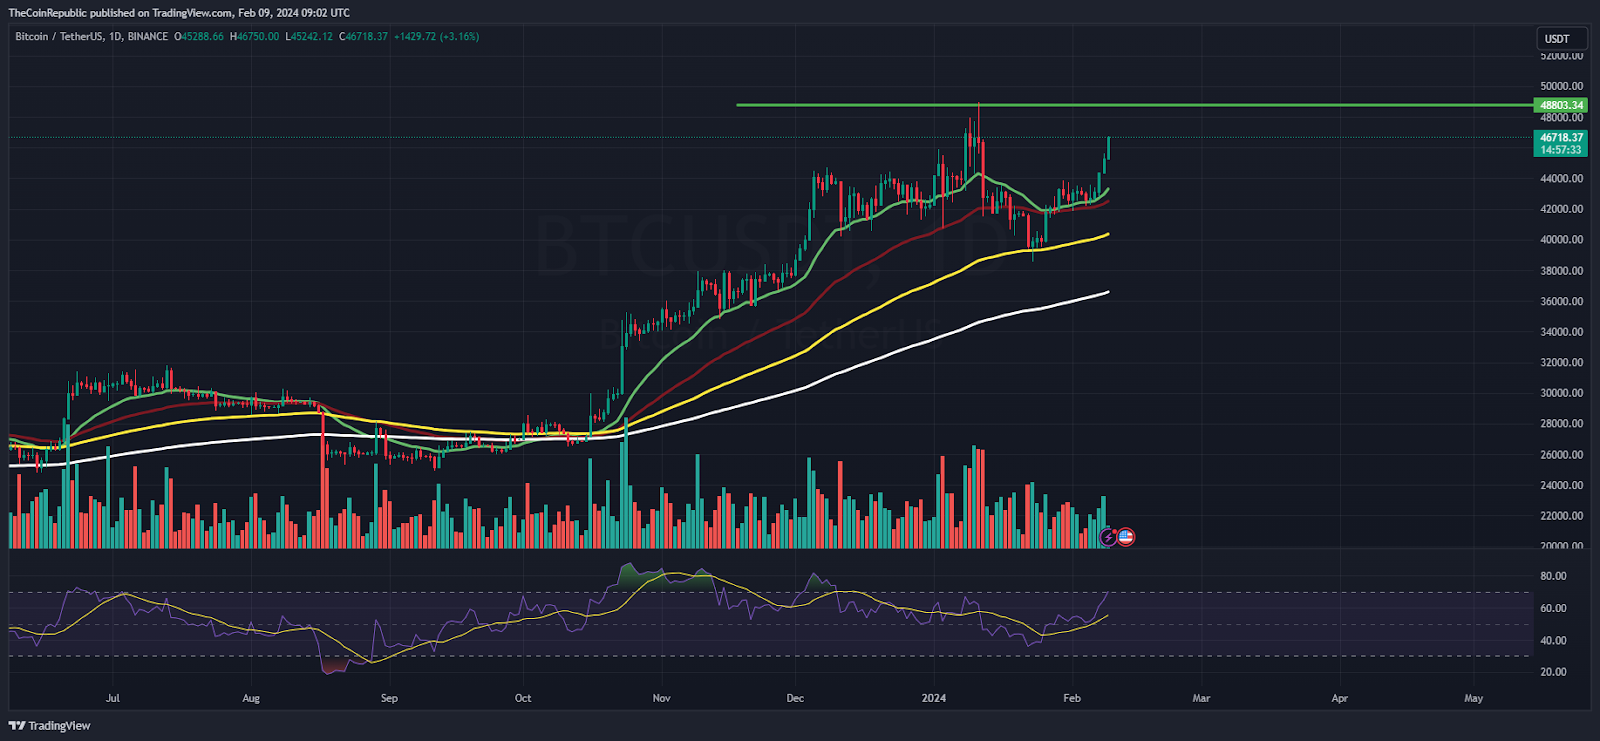 BTC Price Prediction: Can Bitcoin Claim the $50k Mark This Month?